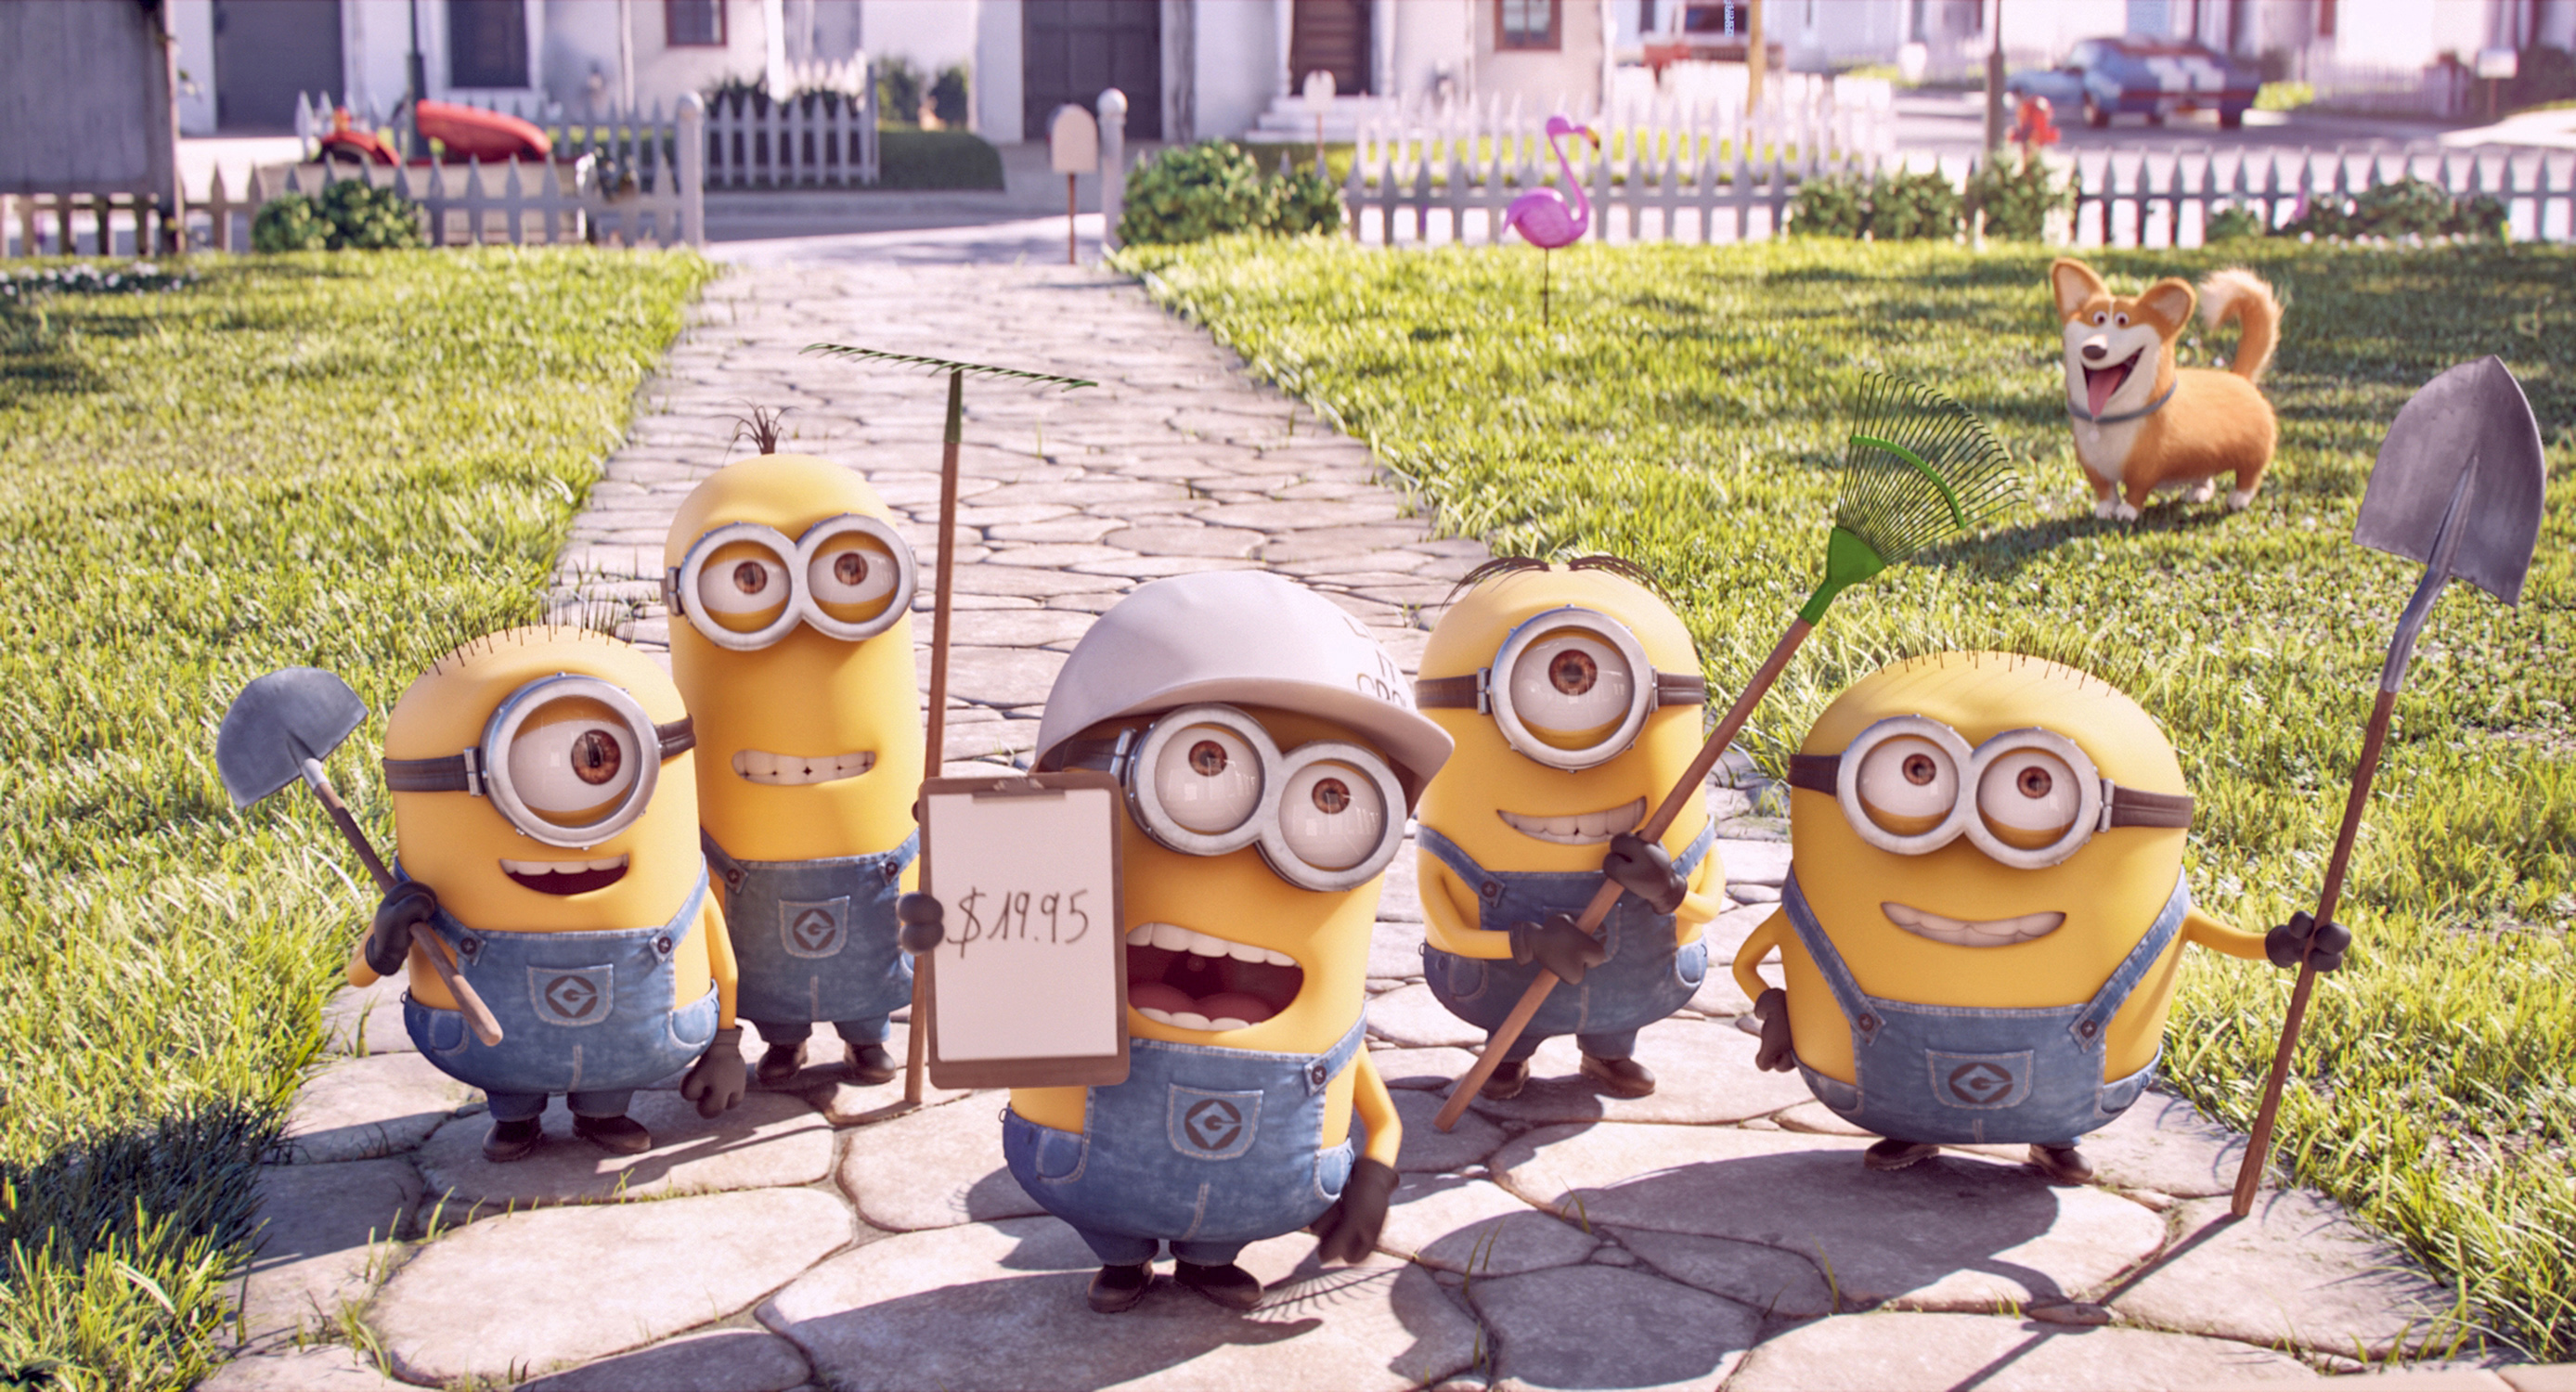 2421-MOW-00074R Mower Minions, a never-before-seen short film starring the Minionsdebuts with Illumination Entertainment and Universal Pictures The Secret Life of Pets, in theaters on July 8, 2016. Credit: Illumination Entertainment and Universal Pictures